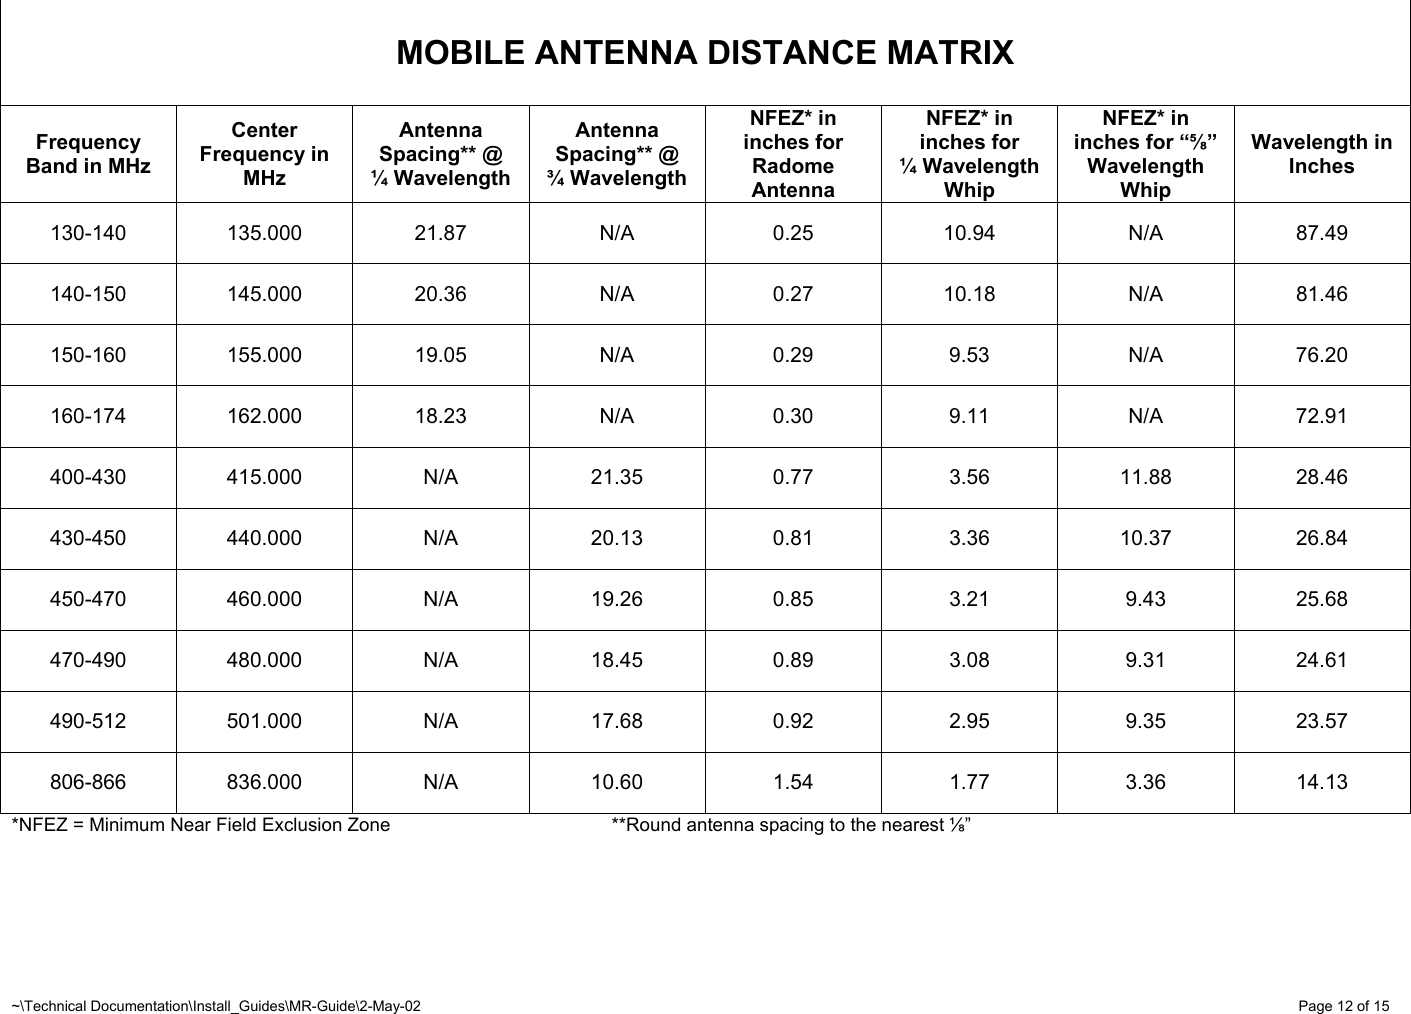 ~\Technical Documentation\Install_Guides\MR-Guide\2-May-02   Page 12 of 15    MOBILE ANTENNA DISTANCE MATRIX Frequency Band in MHz Center Frequency in MHz Antenna Spacing** @ ¼ Wavelength Antenna Spacing** @ ¾ Wavelength NFEZ* in inches for Radome Antenna NFEZ* in inches for  ¼ Wavelength Whip NFEZ* in inches for “⅝” Wavelength Whip Wavelength in Inches 130-140 135.000  21.87  N/A  0.25 10.94  N/A  87.49 140-150 145.000  20.36  N/A  0.27 10.18  N/A  81.46 150-160 155.000  19.05  N/A  0.29  9.53  N/A  76.20 160-174 162.000  18.23  N/A  0.30  9.11  N/A  72.91 400-430 415.000  N/A  21.35  0.77 3.56 11.88 28.46 430-450 440.000  N/A  20.13  0.81 3.36 10.37 26.84 450-470 460.000  N/A  19.26  0.85 3.21 9.43 25.68 470-490 480.000  N/A  18.45  0.89 3.08 9.31 24.61 490-512 501.000  N/A  17.68  0.92 2.95 9.35 23.57 806-866 836.000  N/A  10.60  1.54 1.77 3.36 14.13 *NFEZ = Minimum Near Field Exclusion Zone       **Round antenna spacing to the nearest ⅛” 